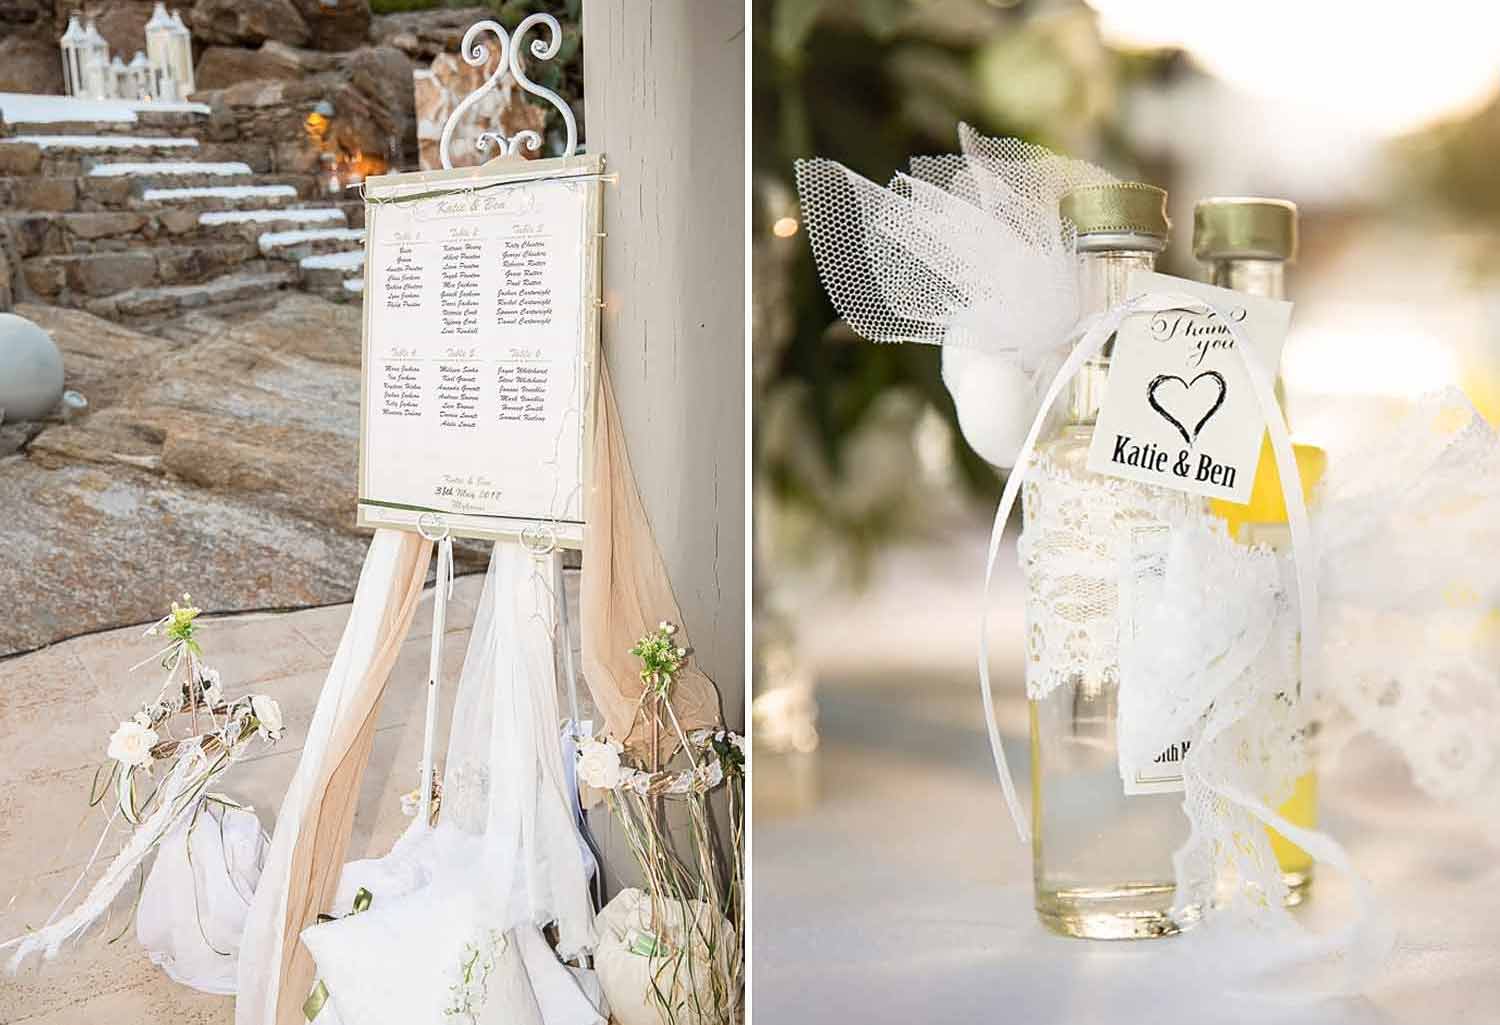 wedding favours in a bottle sign fot finding the seat